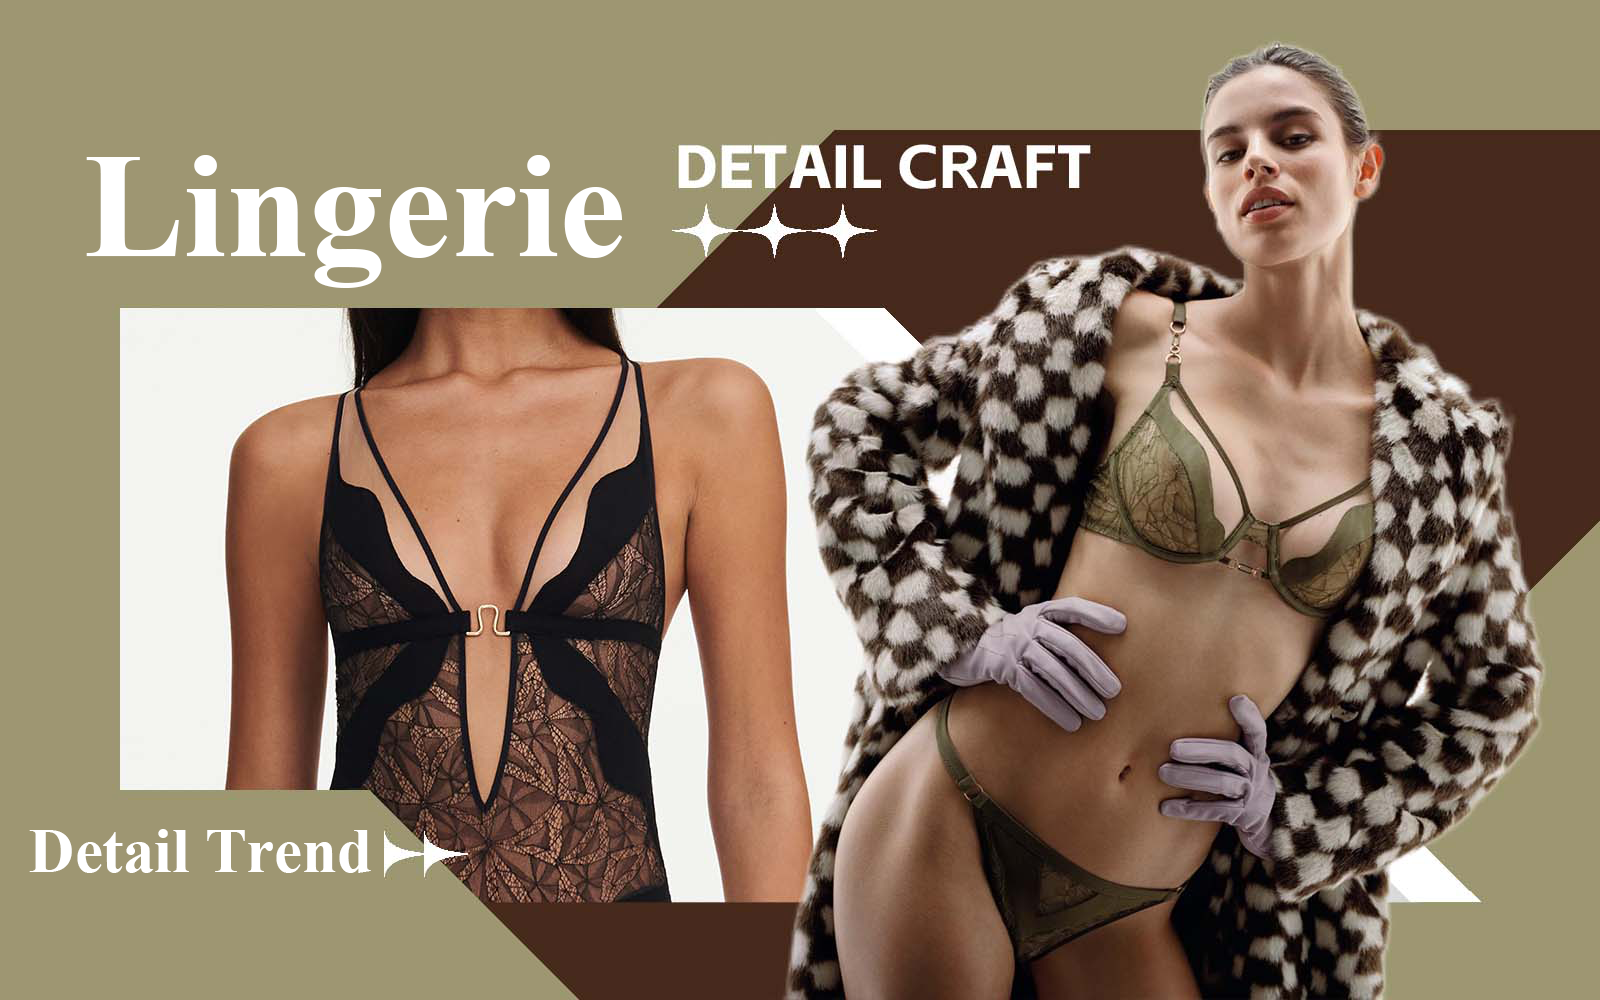 Front Connection -- The Detail & Craft Trend for Women's Lingerie